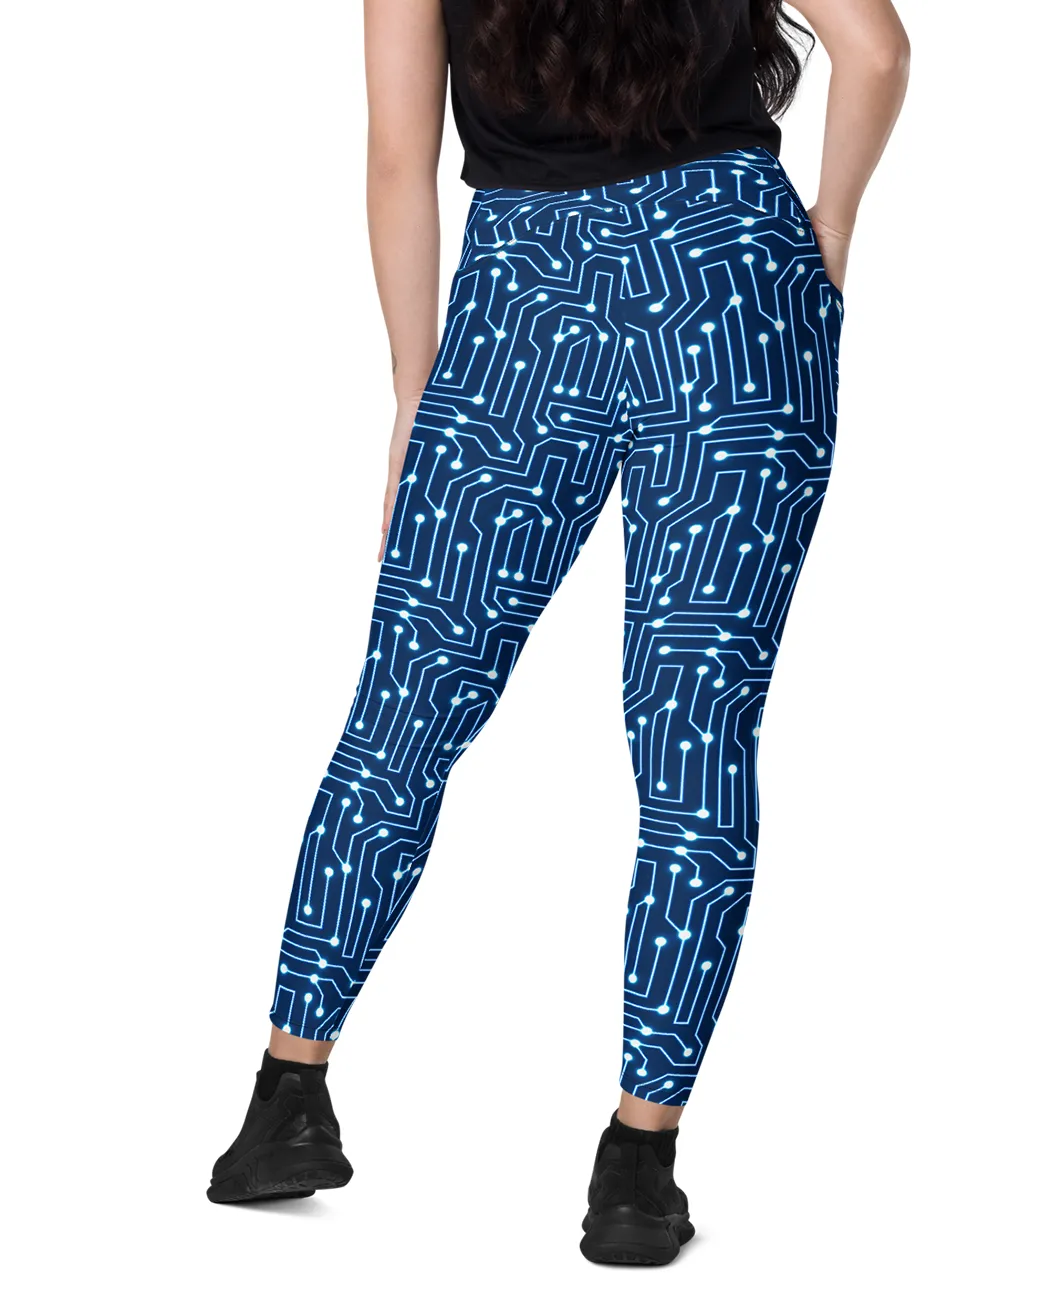 Circuit Board Leggings with pockets - Sporty Chimp legging, workout gear &  more